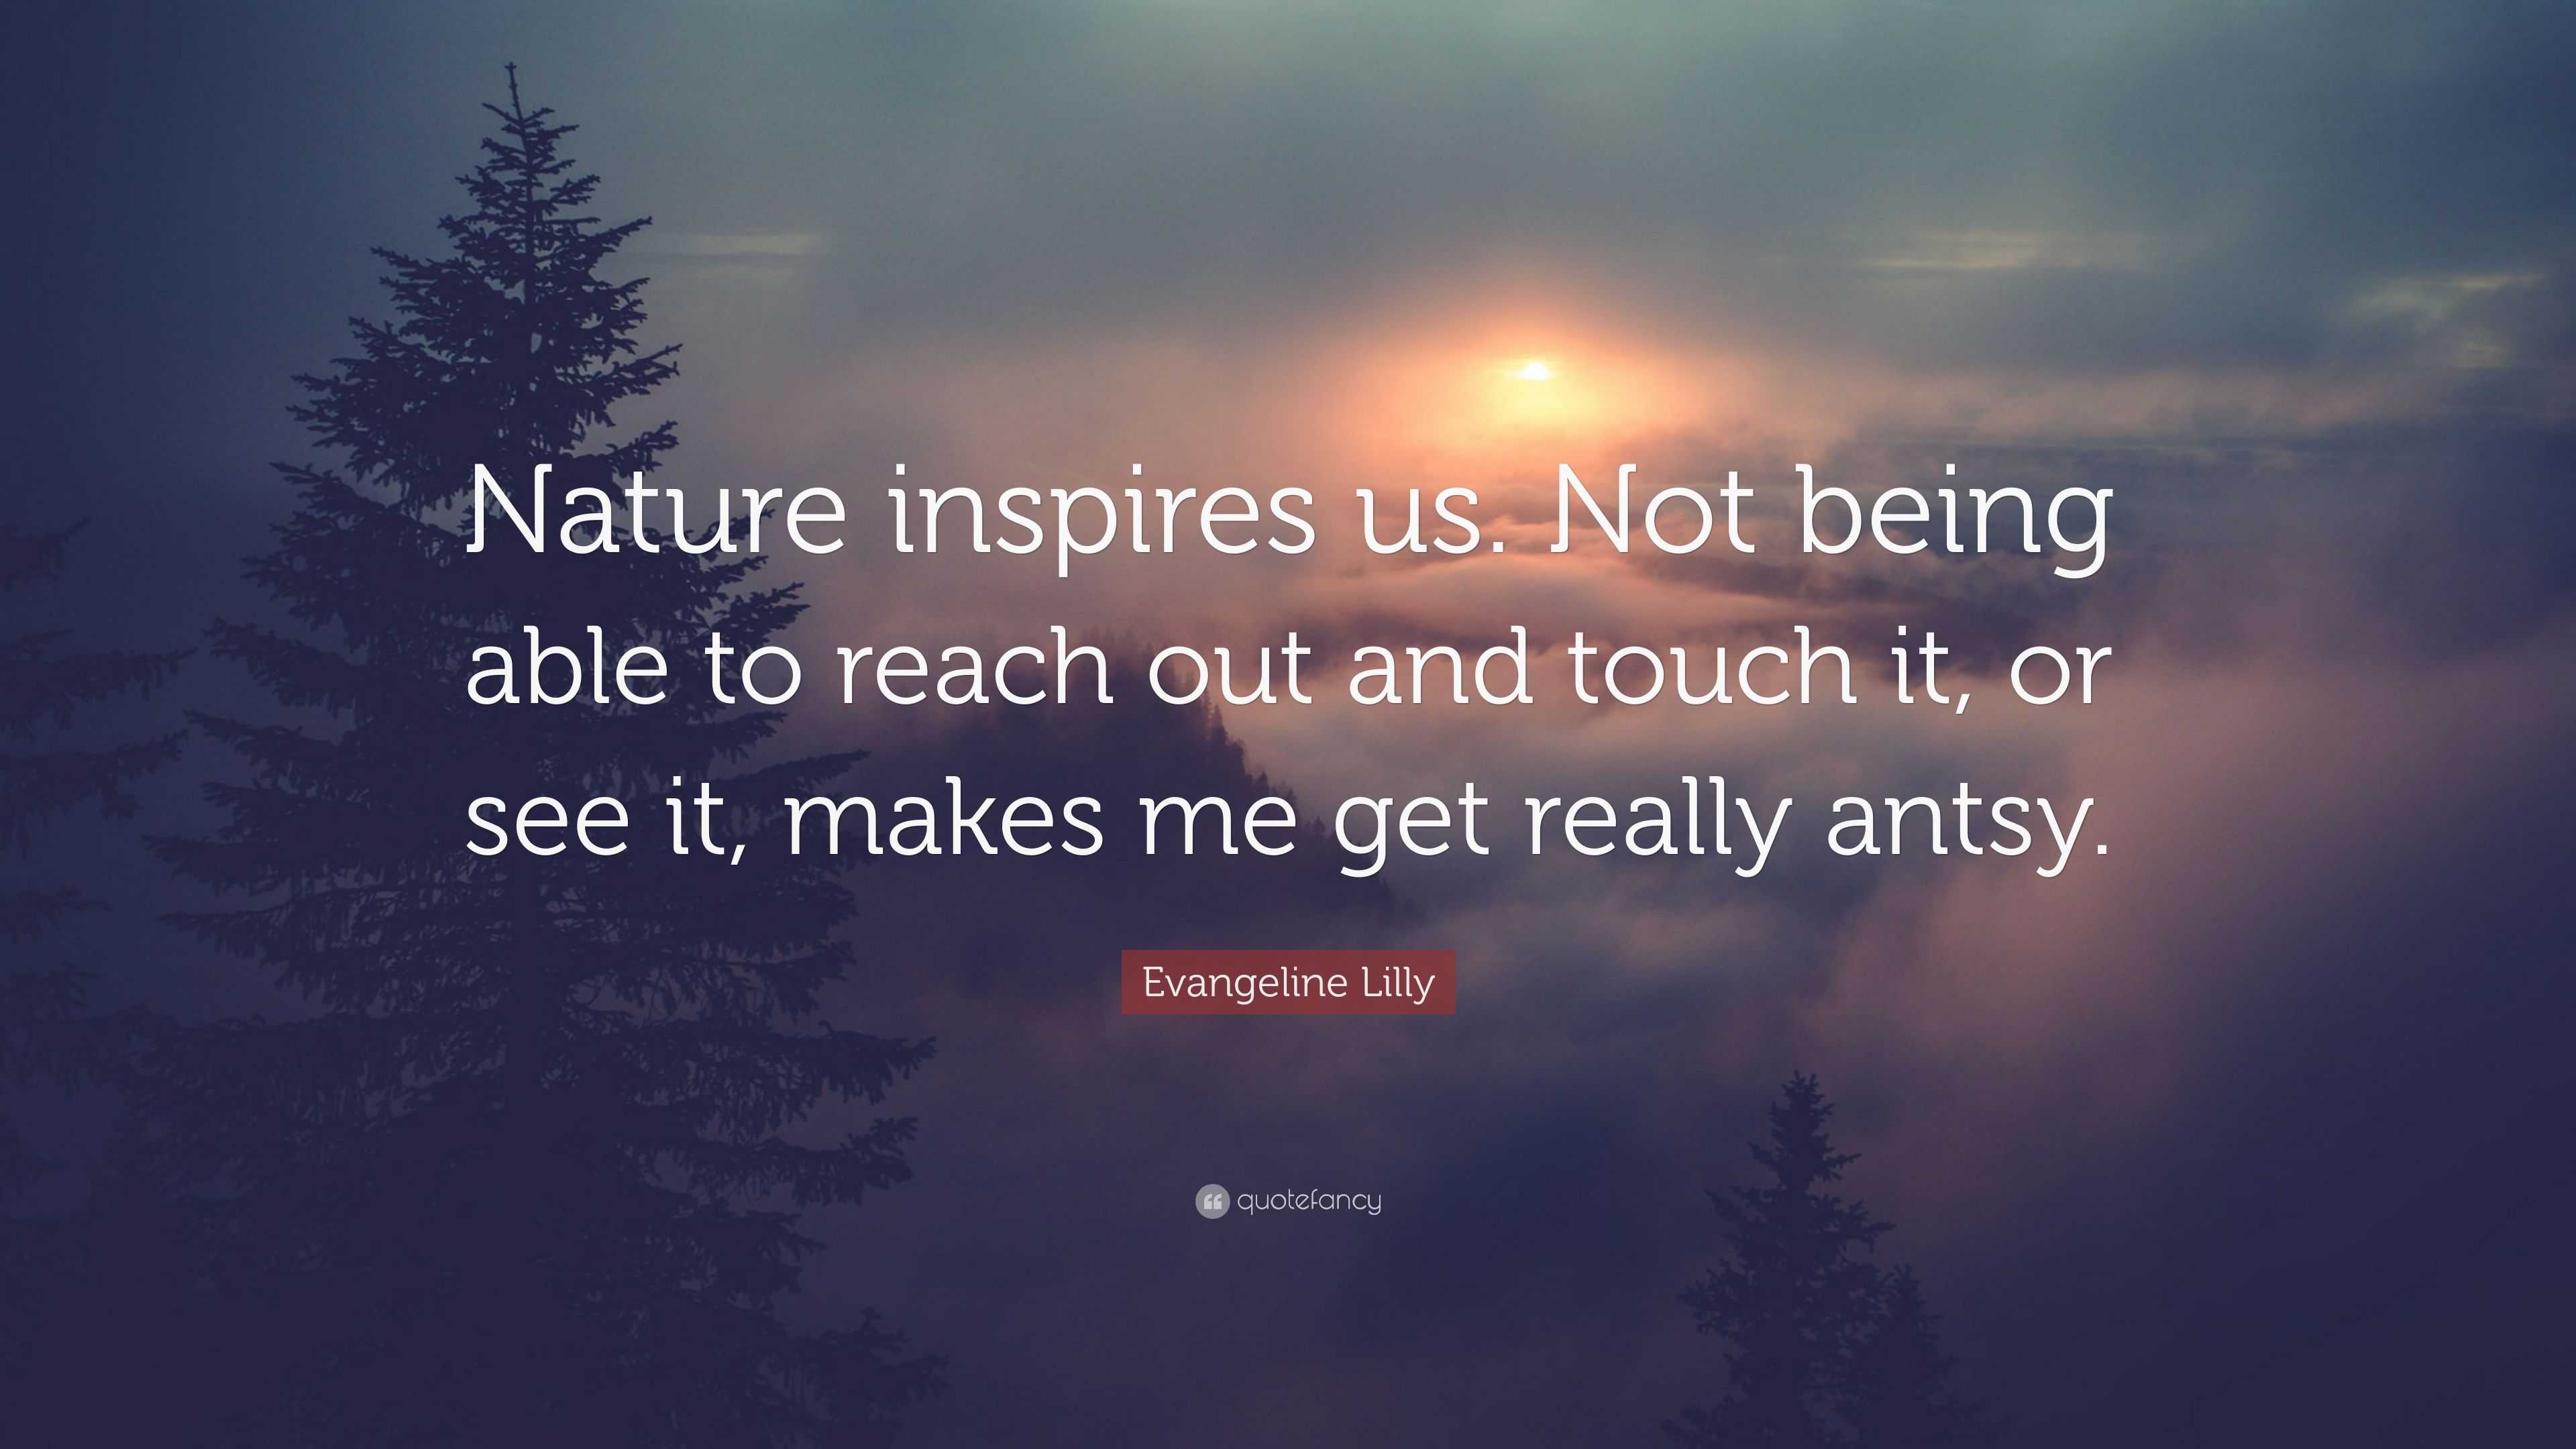 Evangeline Lilly Quote: “Nature inspires us. Not being able to reach ...